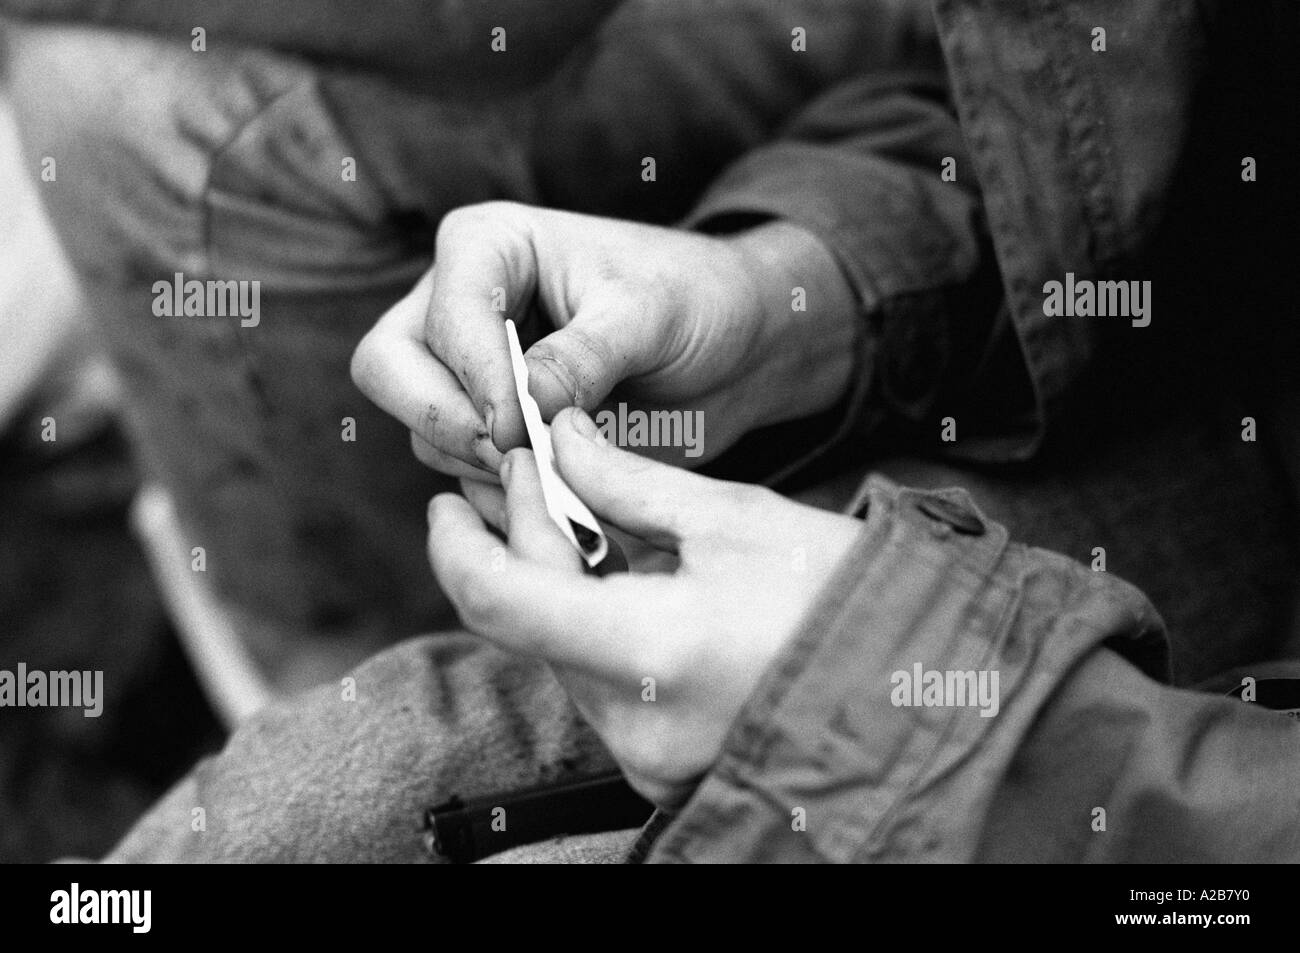 rolling a joint with cannabis Stock Photo